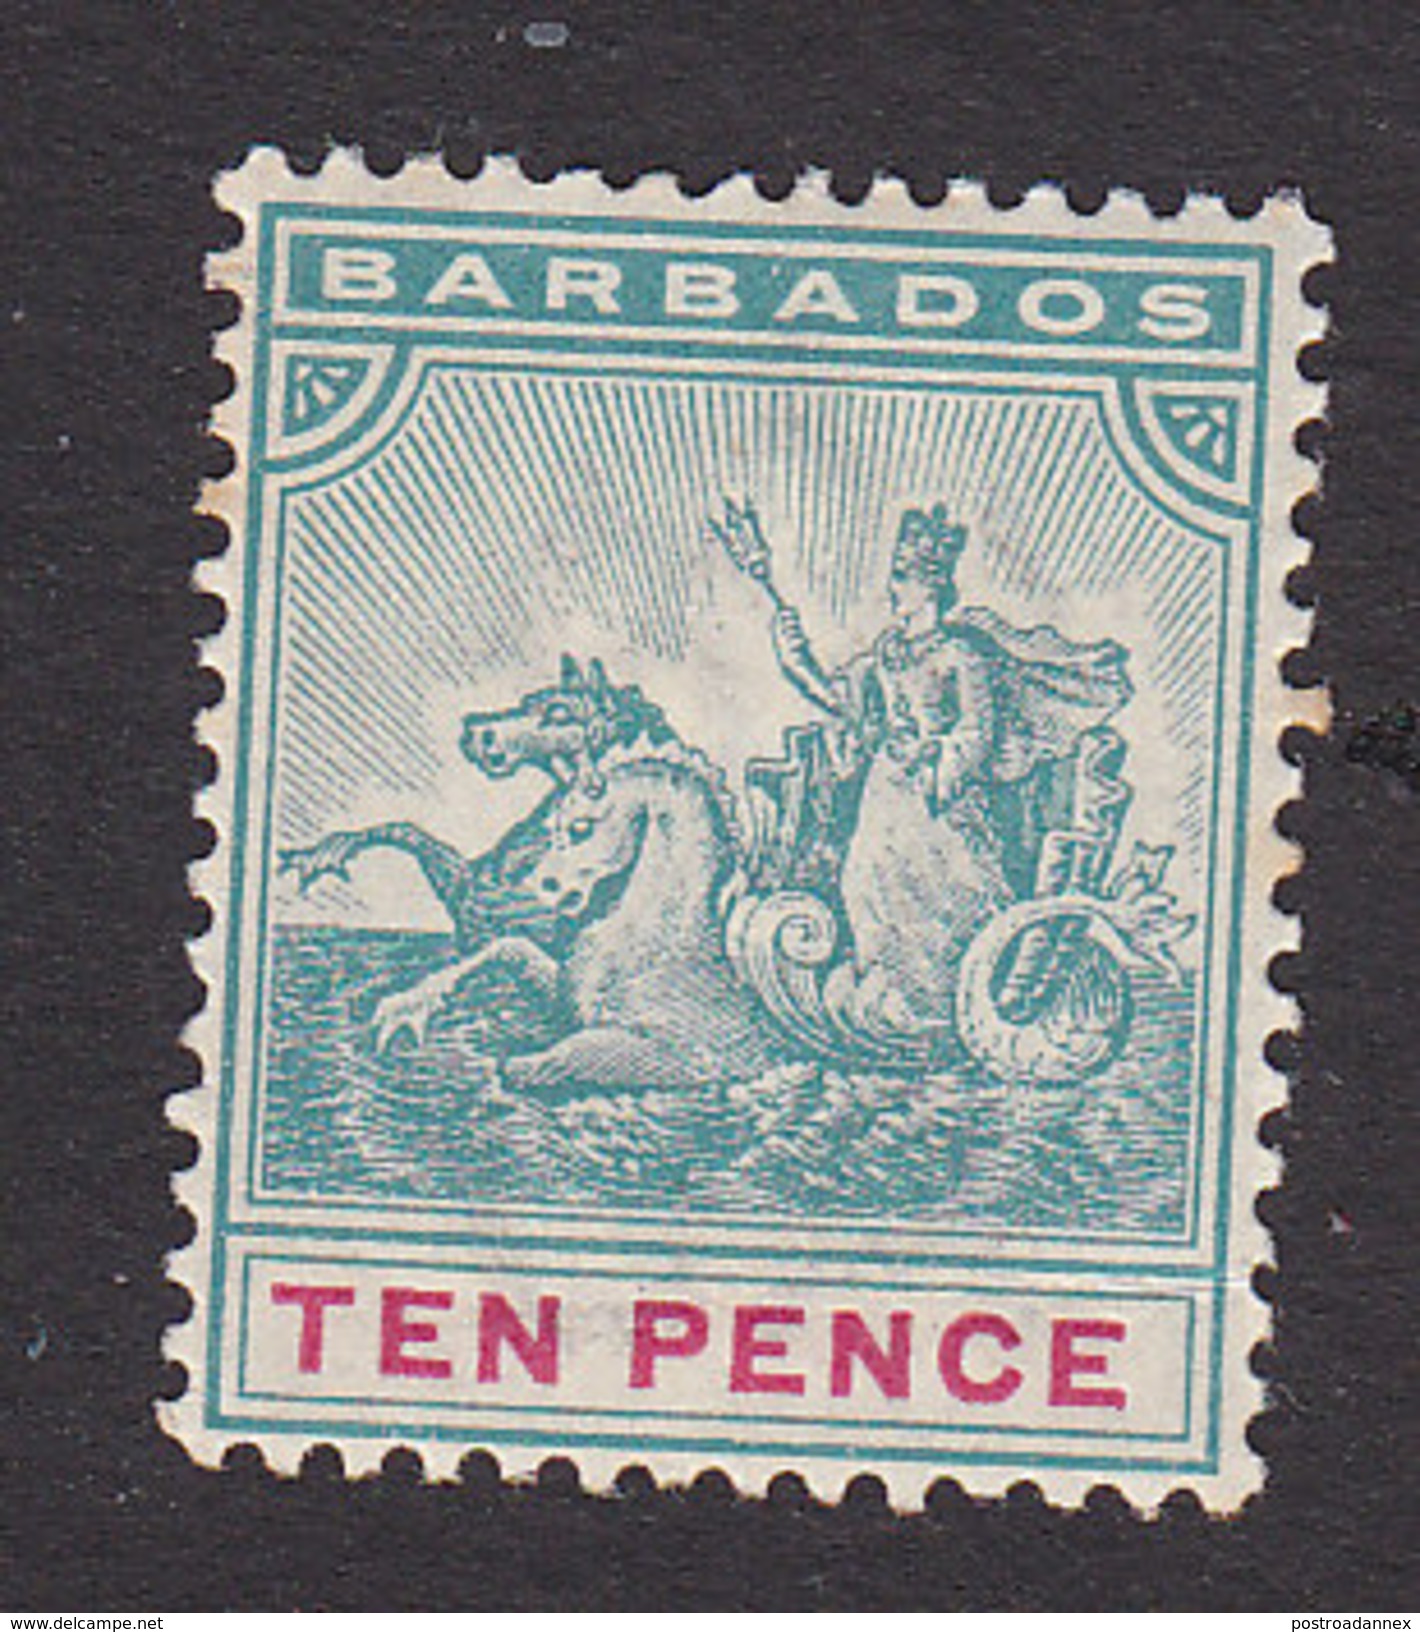 Barbados, Scott #78, Mint Hinged, Badge Of The Colony, Issued 1892 - Barbades (...-1966)